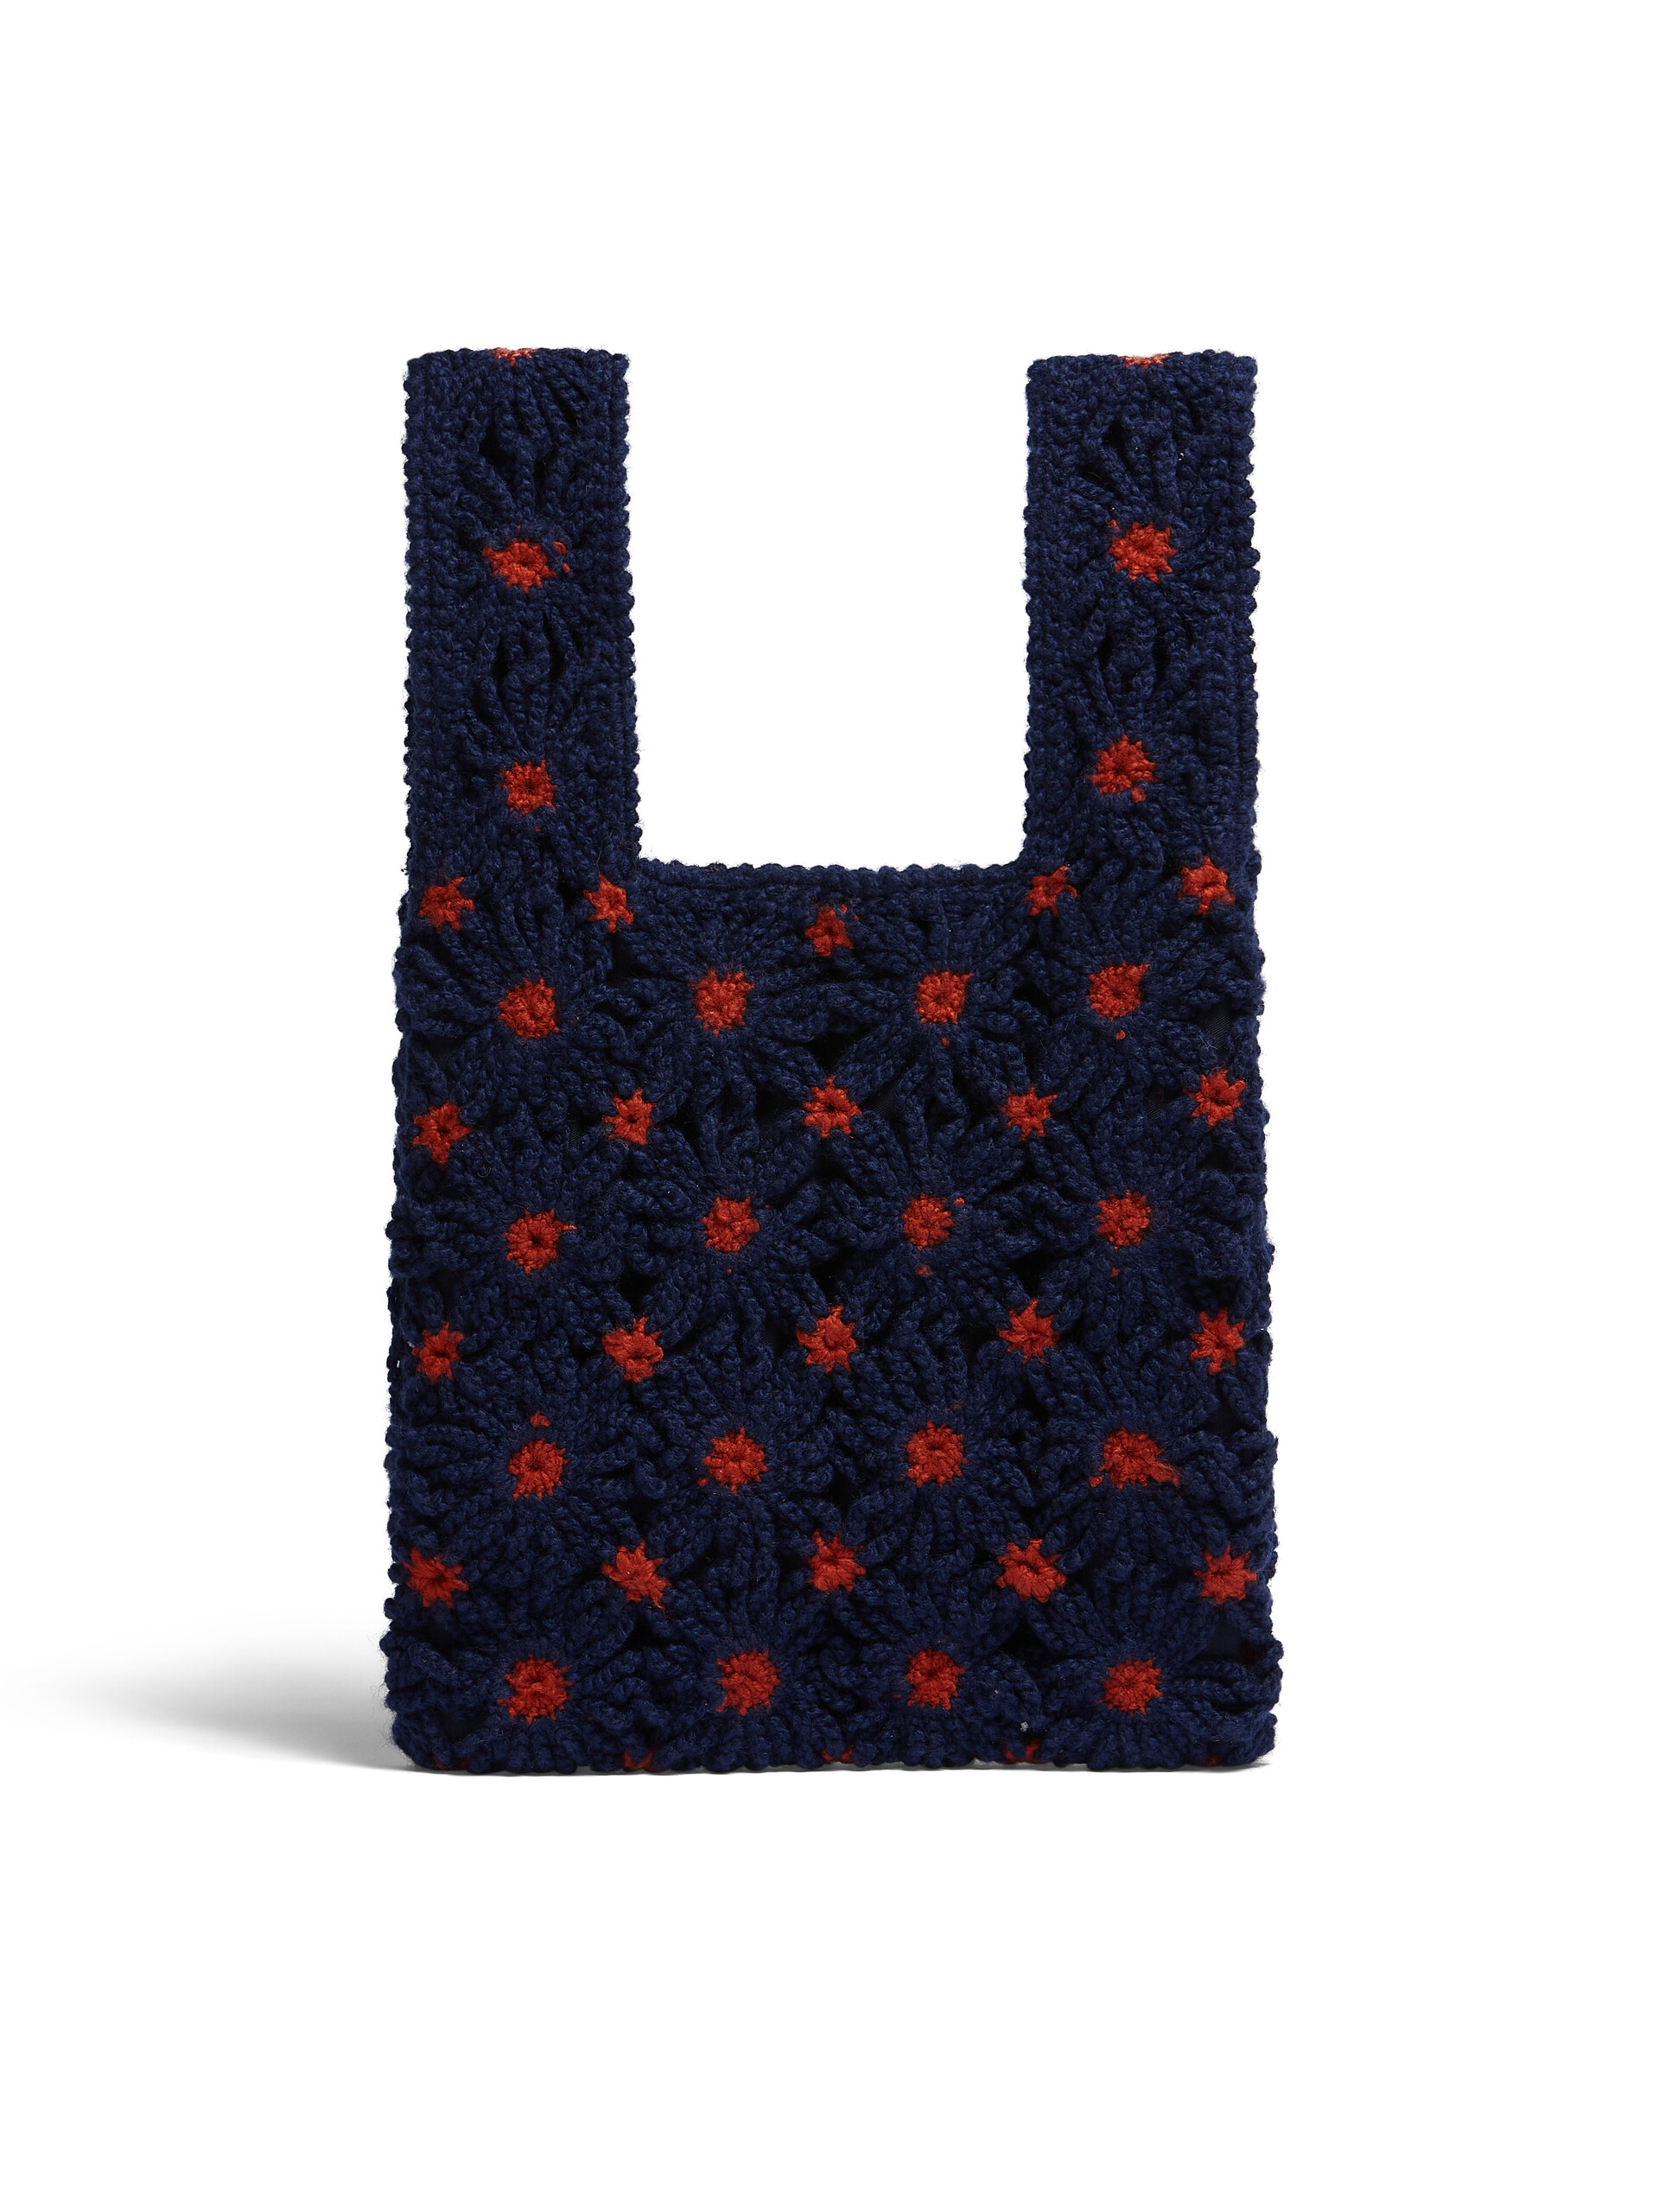 MARNI MARKET FISH bag in blue and red crochet - Bags - Image 3